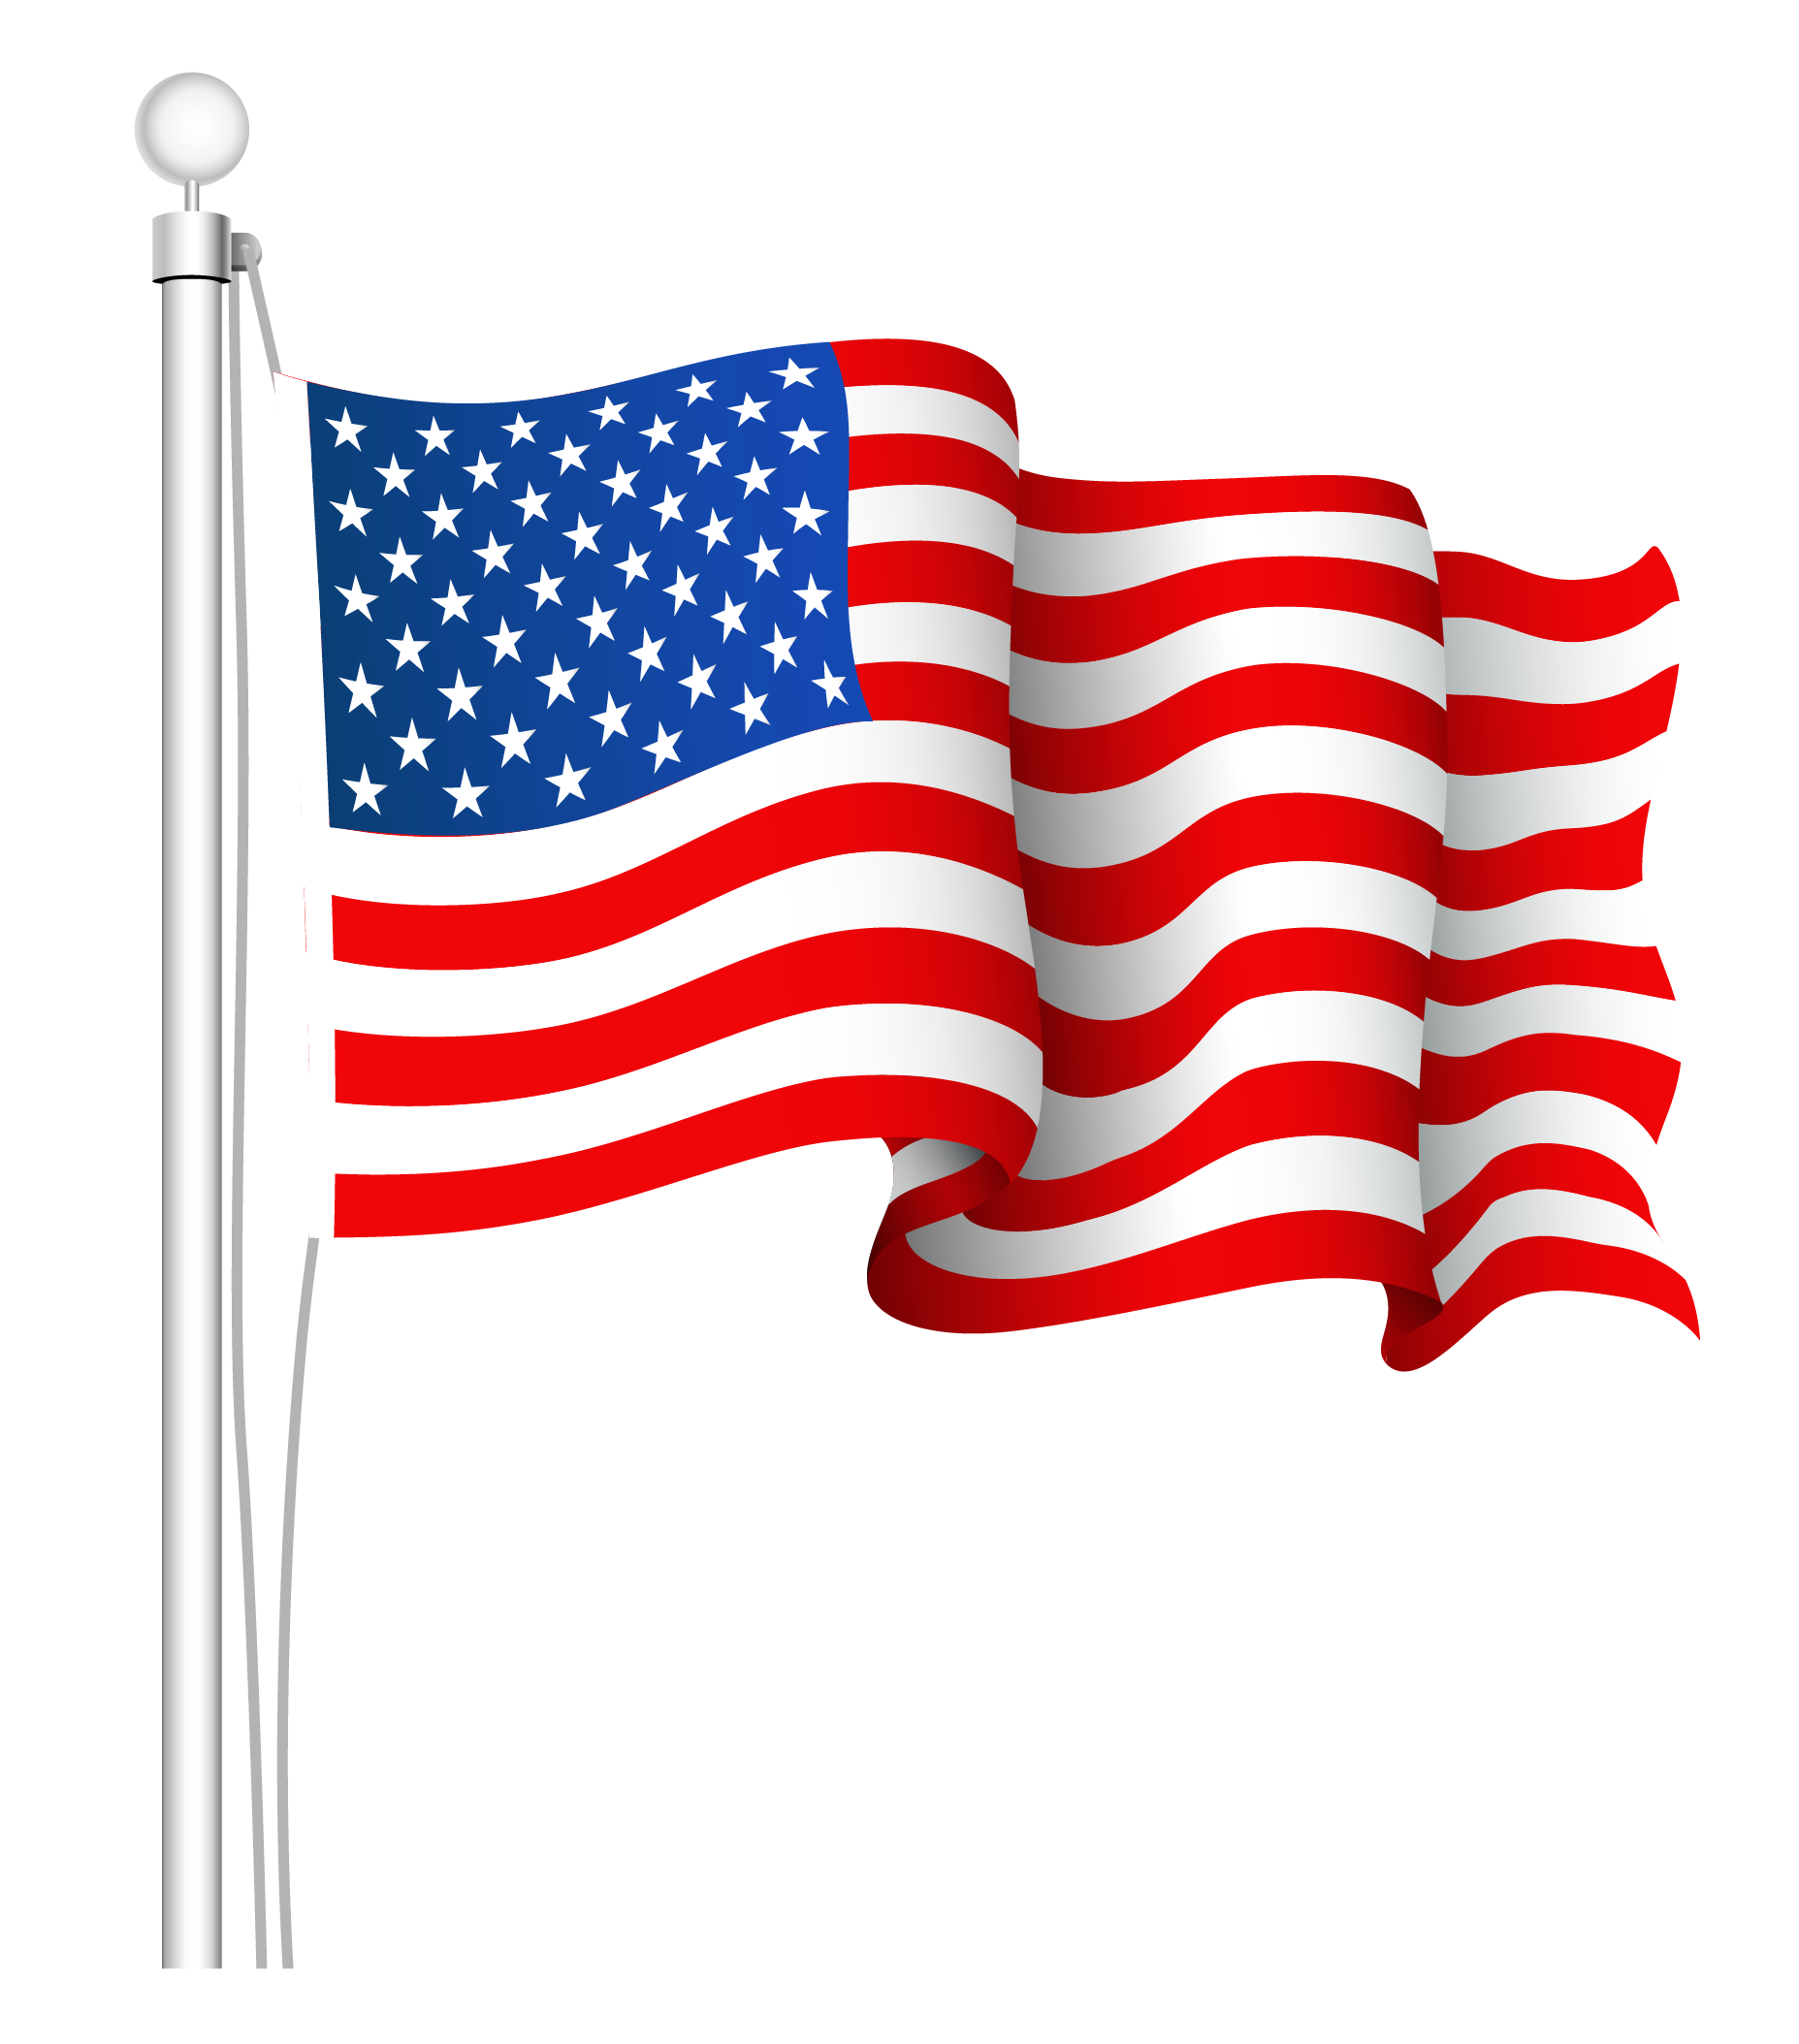 American flag united states flag clipart 3 clipartcow 2